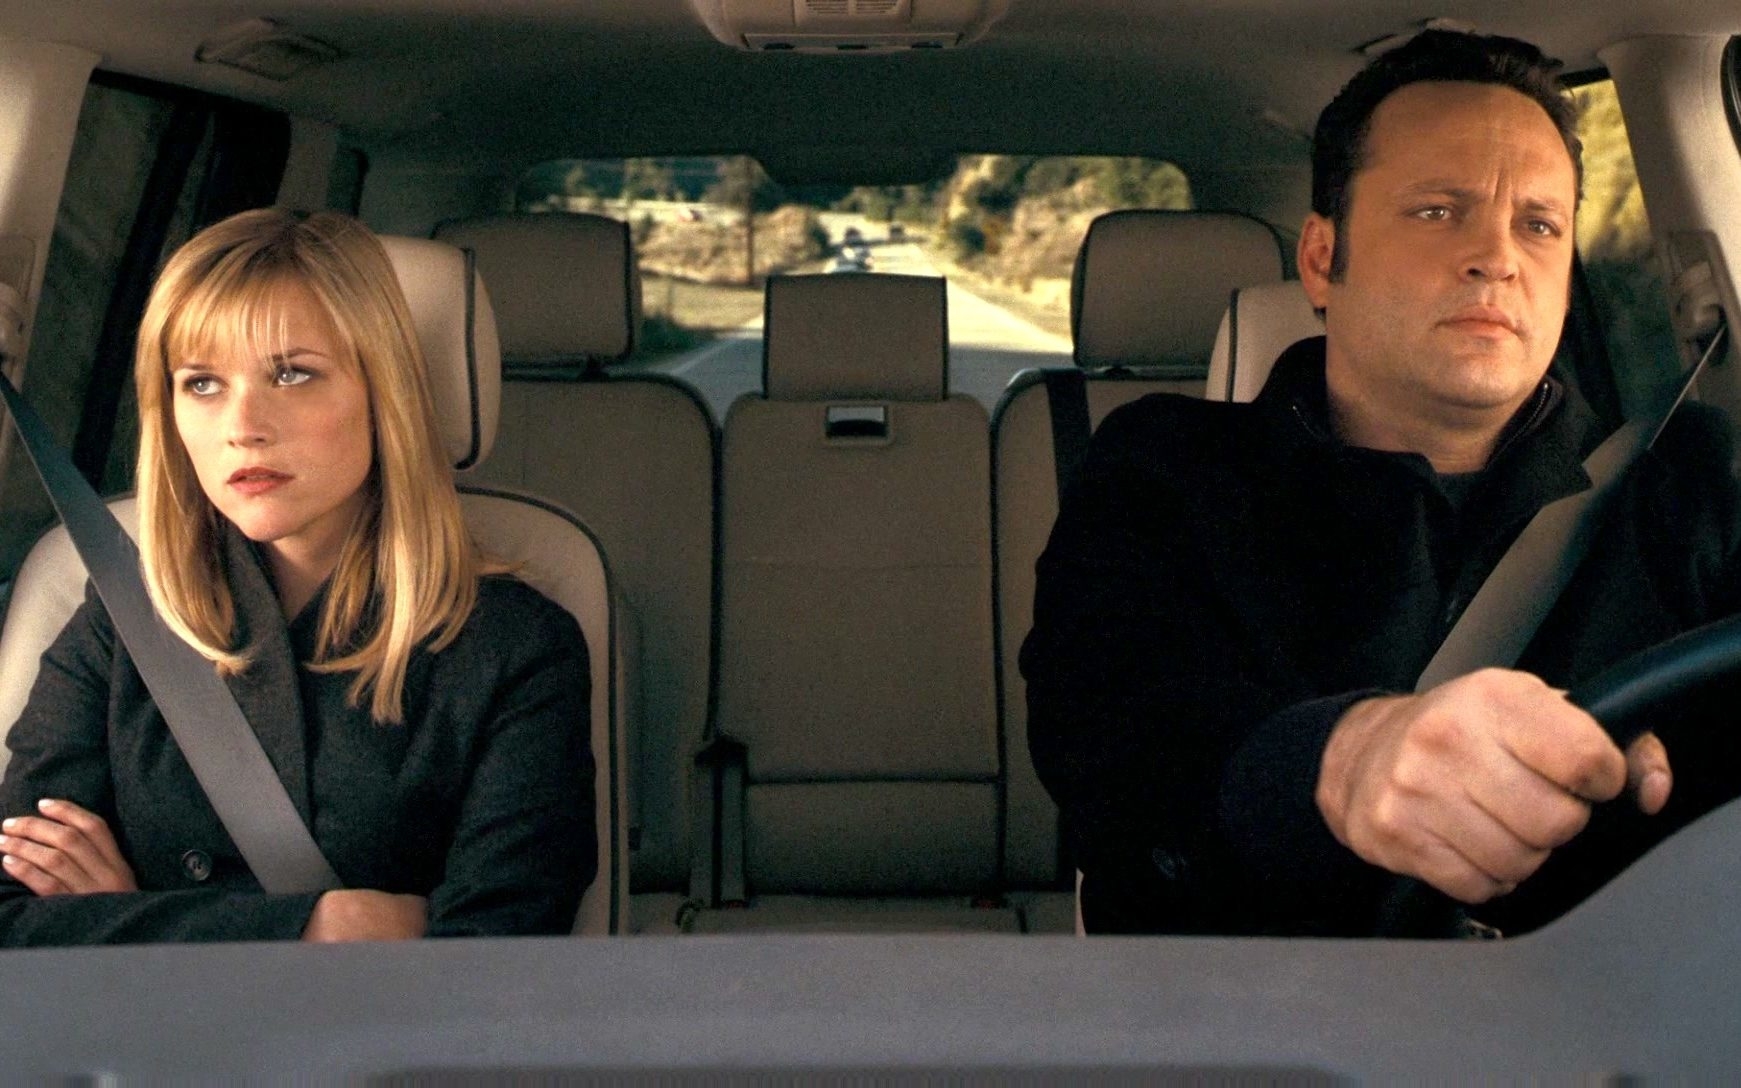 Rees Whetherspoon and Vince Vaughn driving in a car